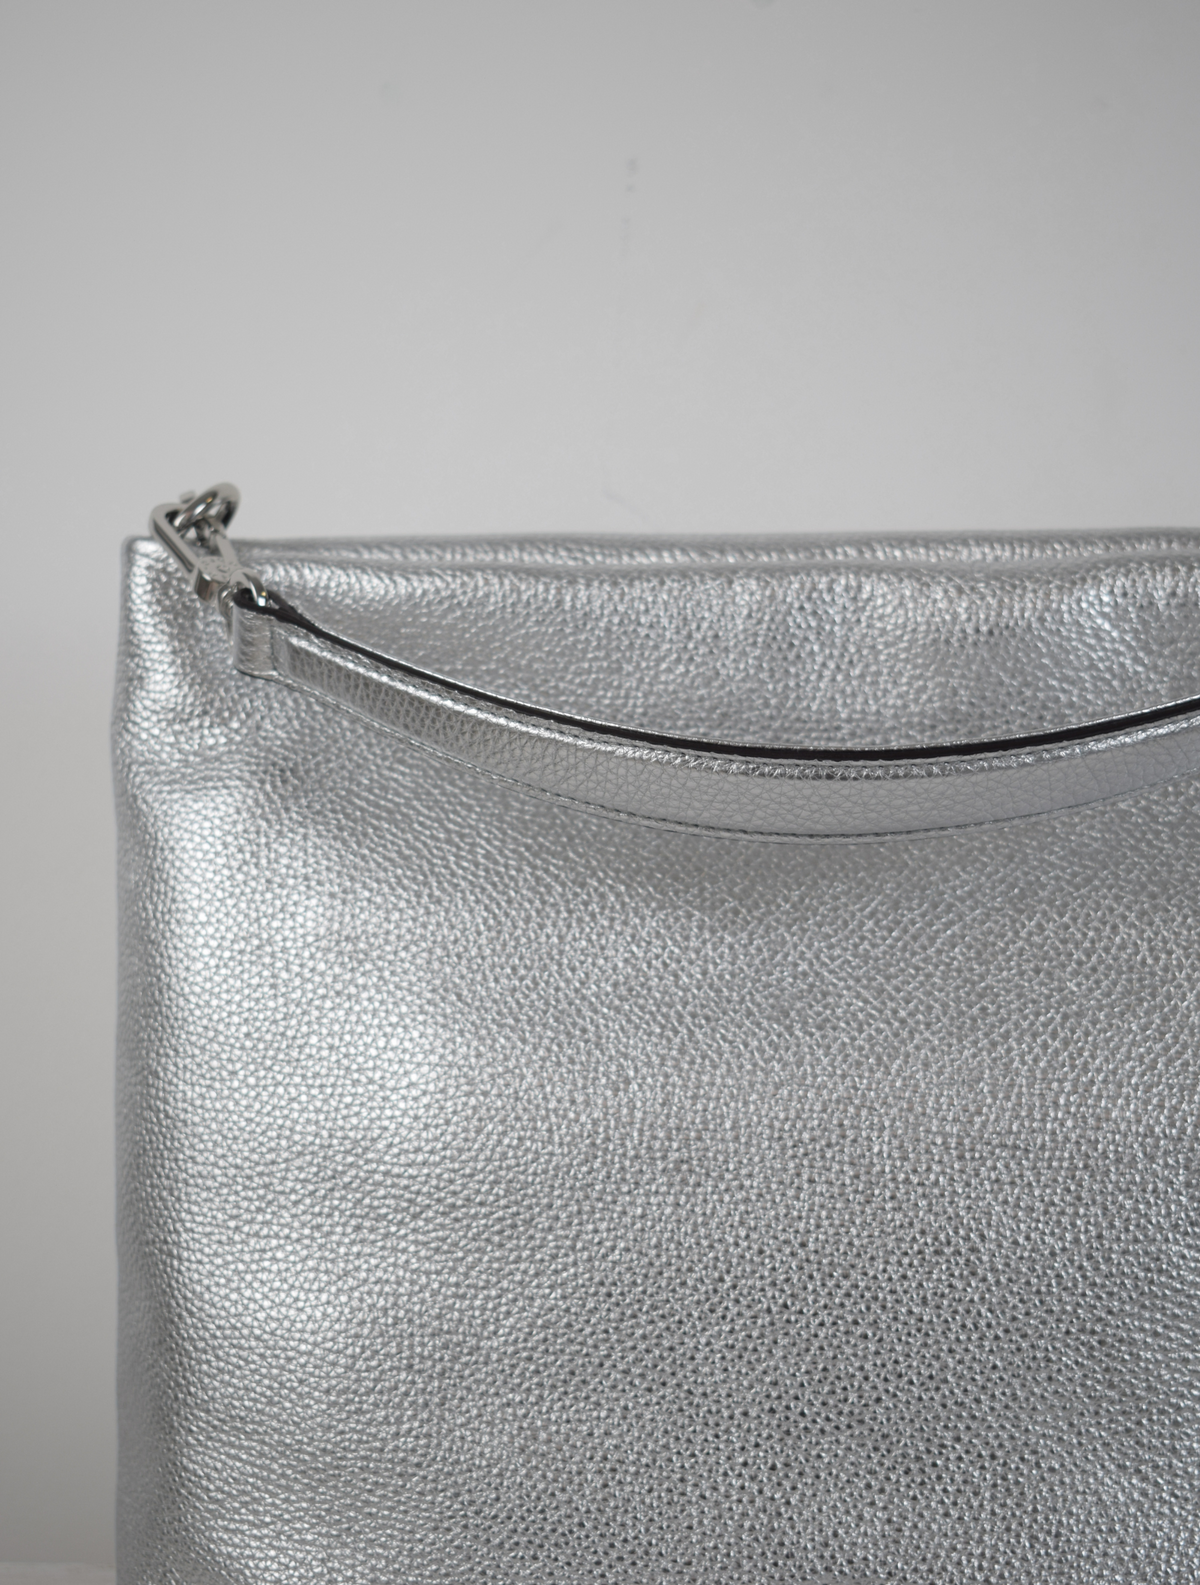 Silver bag with silver strap 